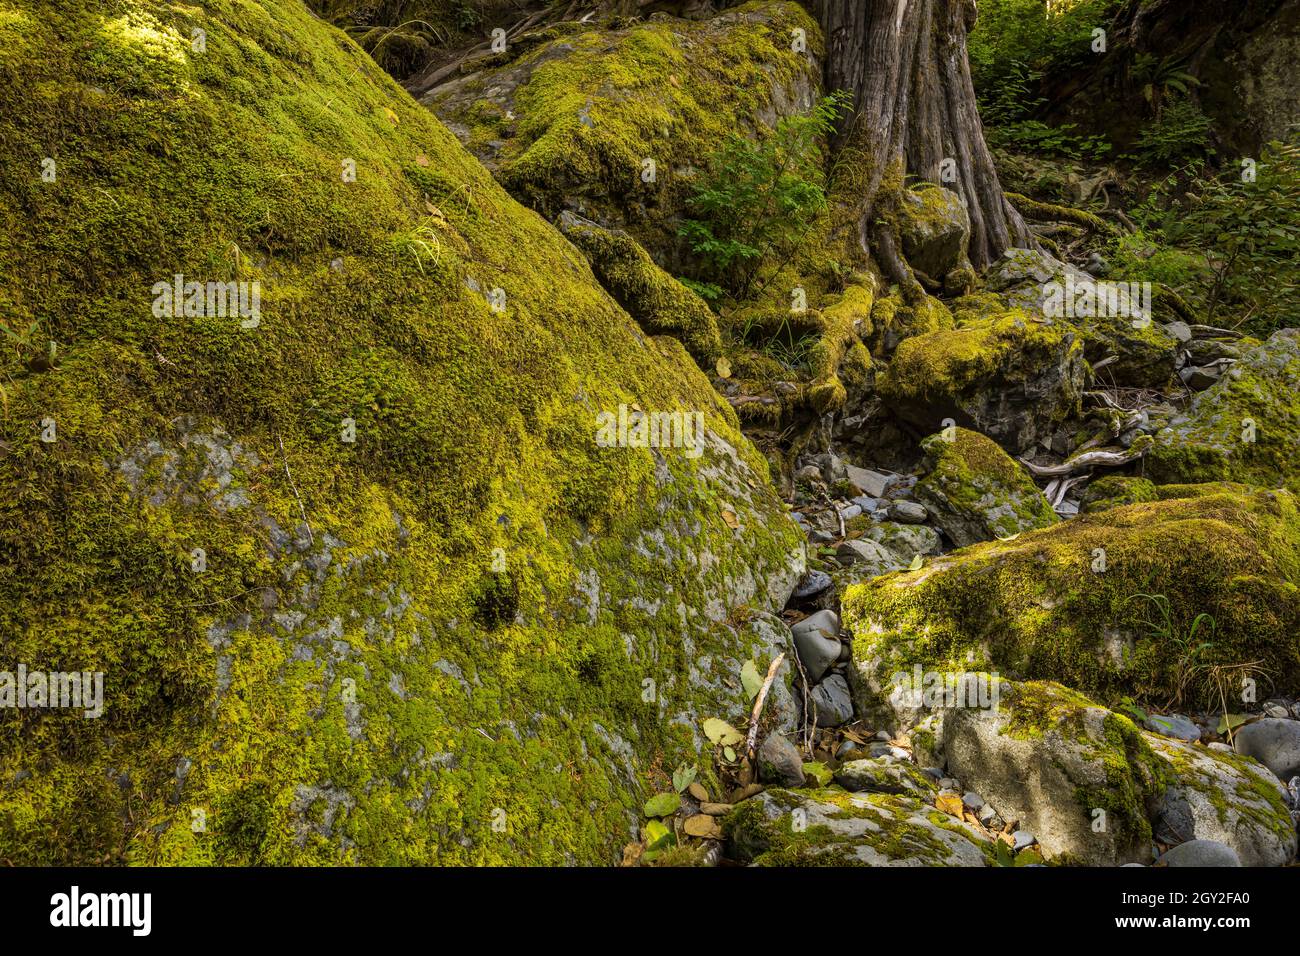 Moss-covered rocks along the North Fork Skokomish River at Staircase in Olympic National Park, Washington State, USA Stock Photo